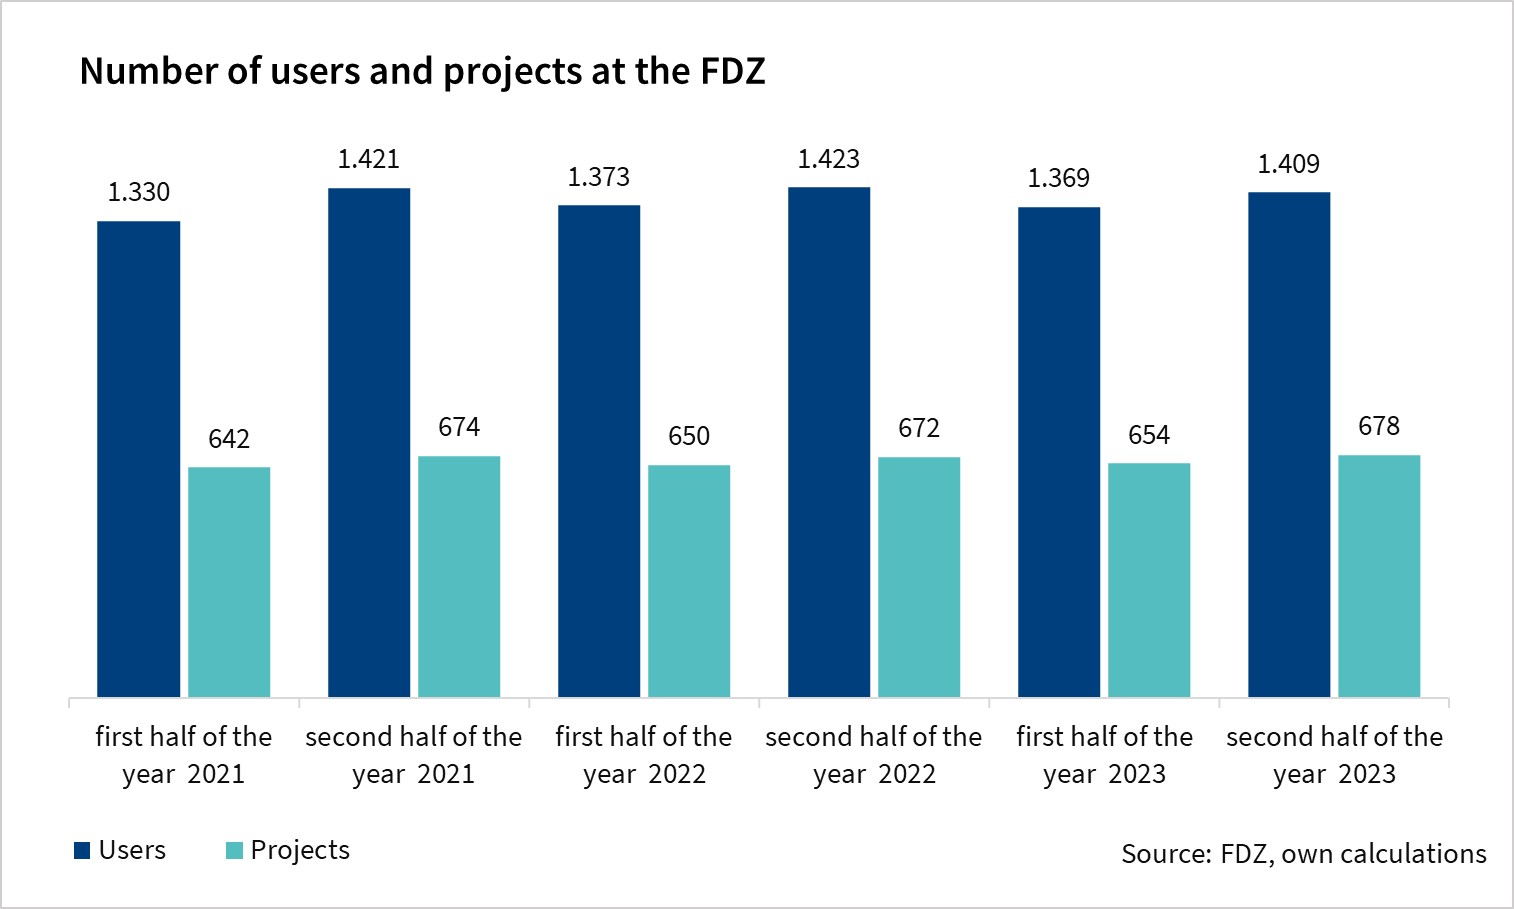 The bar chart shows the number of users and projects at the FDZ (all users in all projects are counted). The values are semi-annual data for the last three years and are based on the FDZ's own calculations.